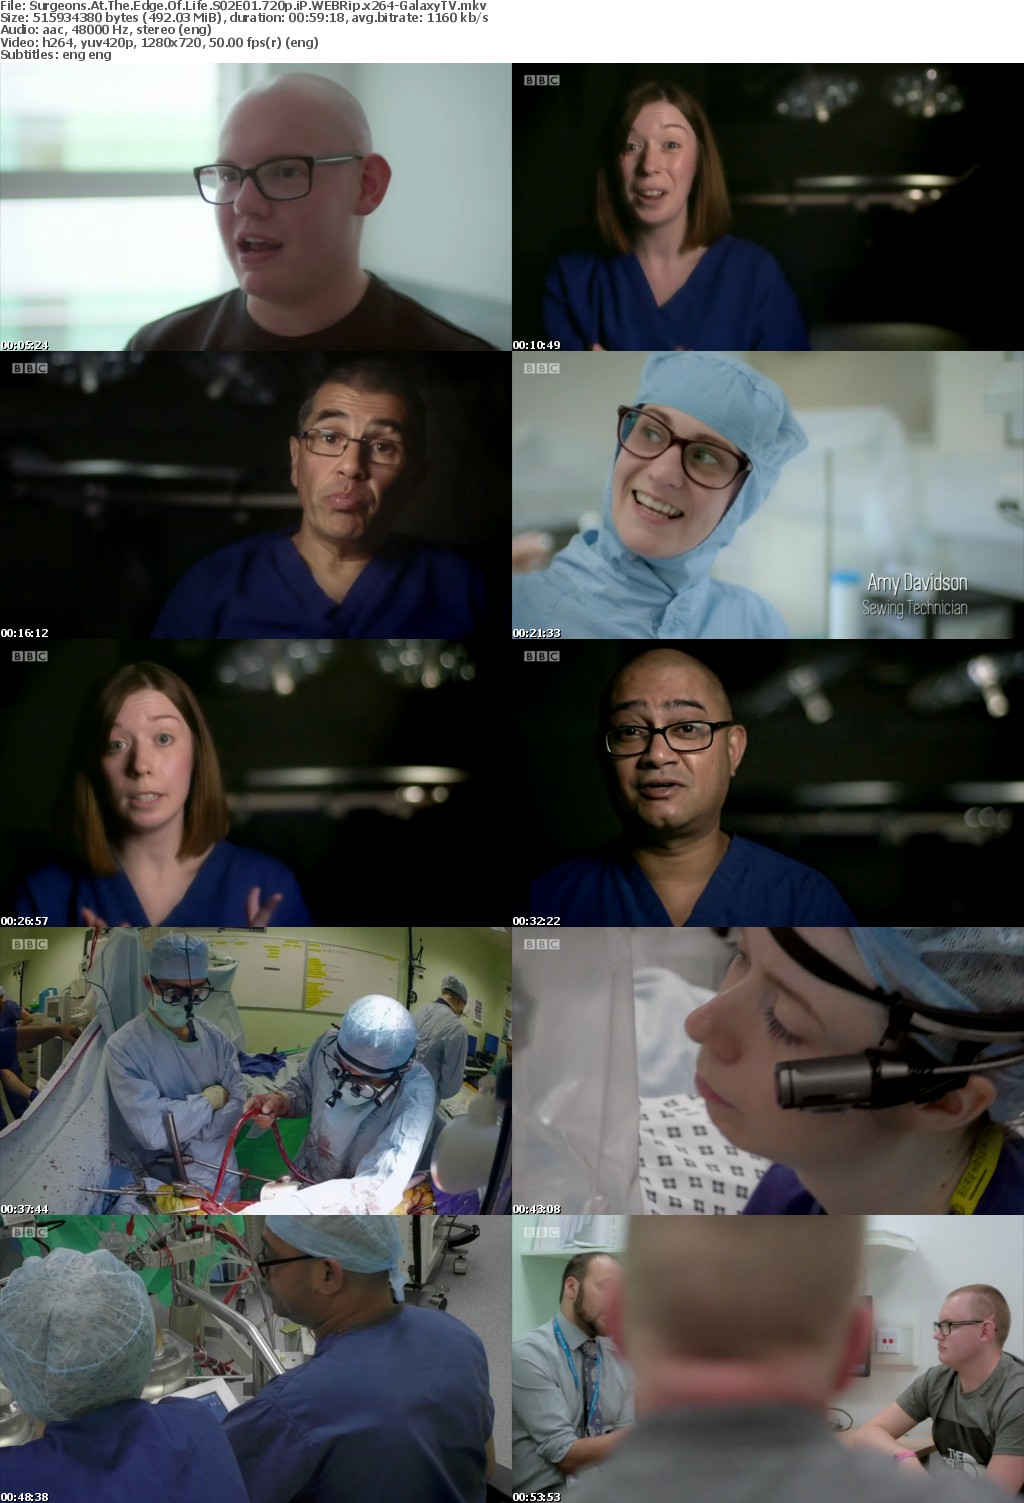 Surgeons At The Edge Of Life S02 COMPLETE 720p iP WEBRip x264-GalaxyTV